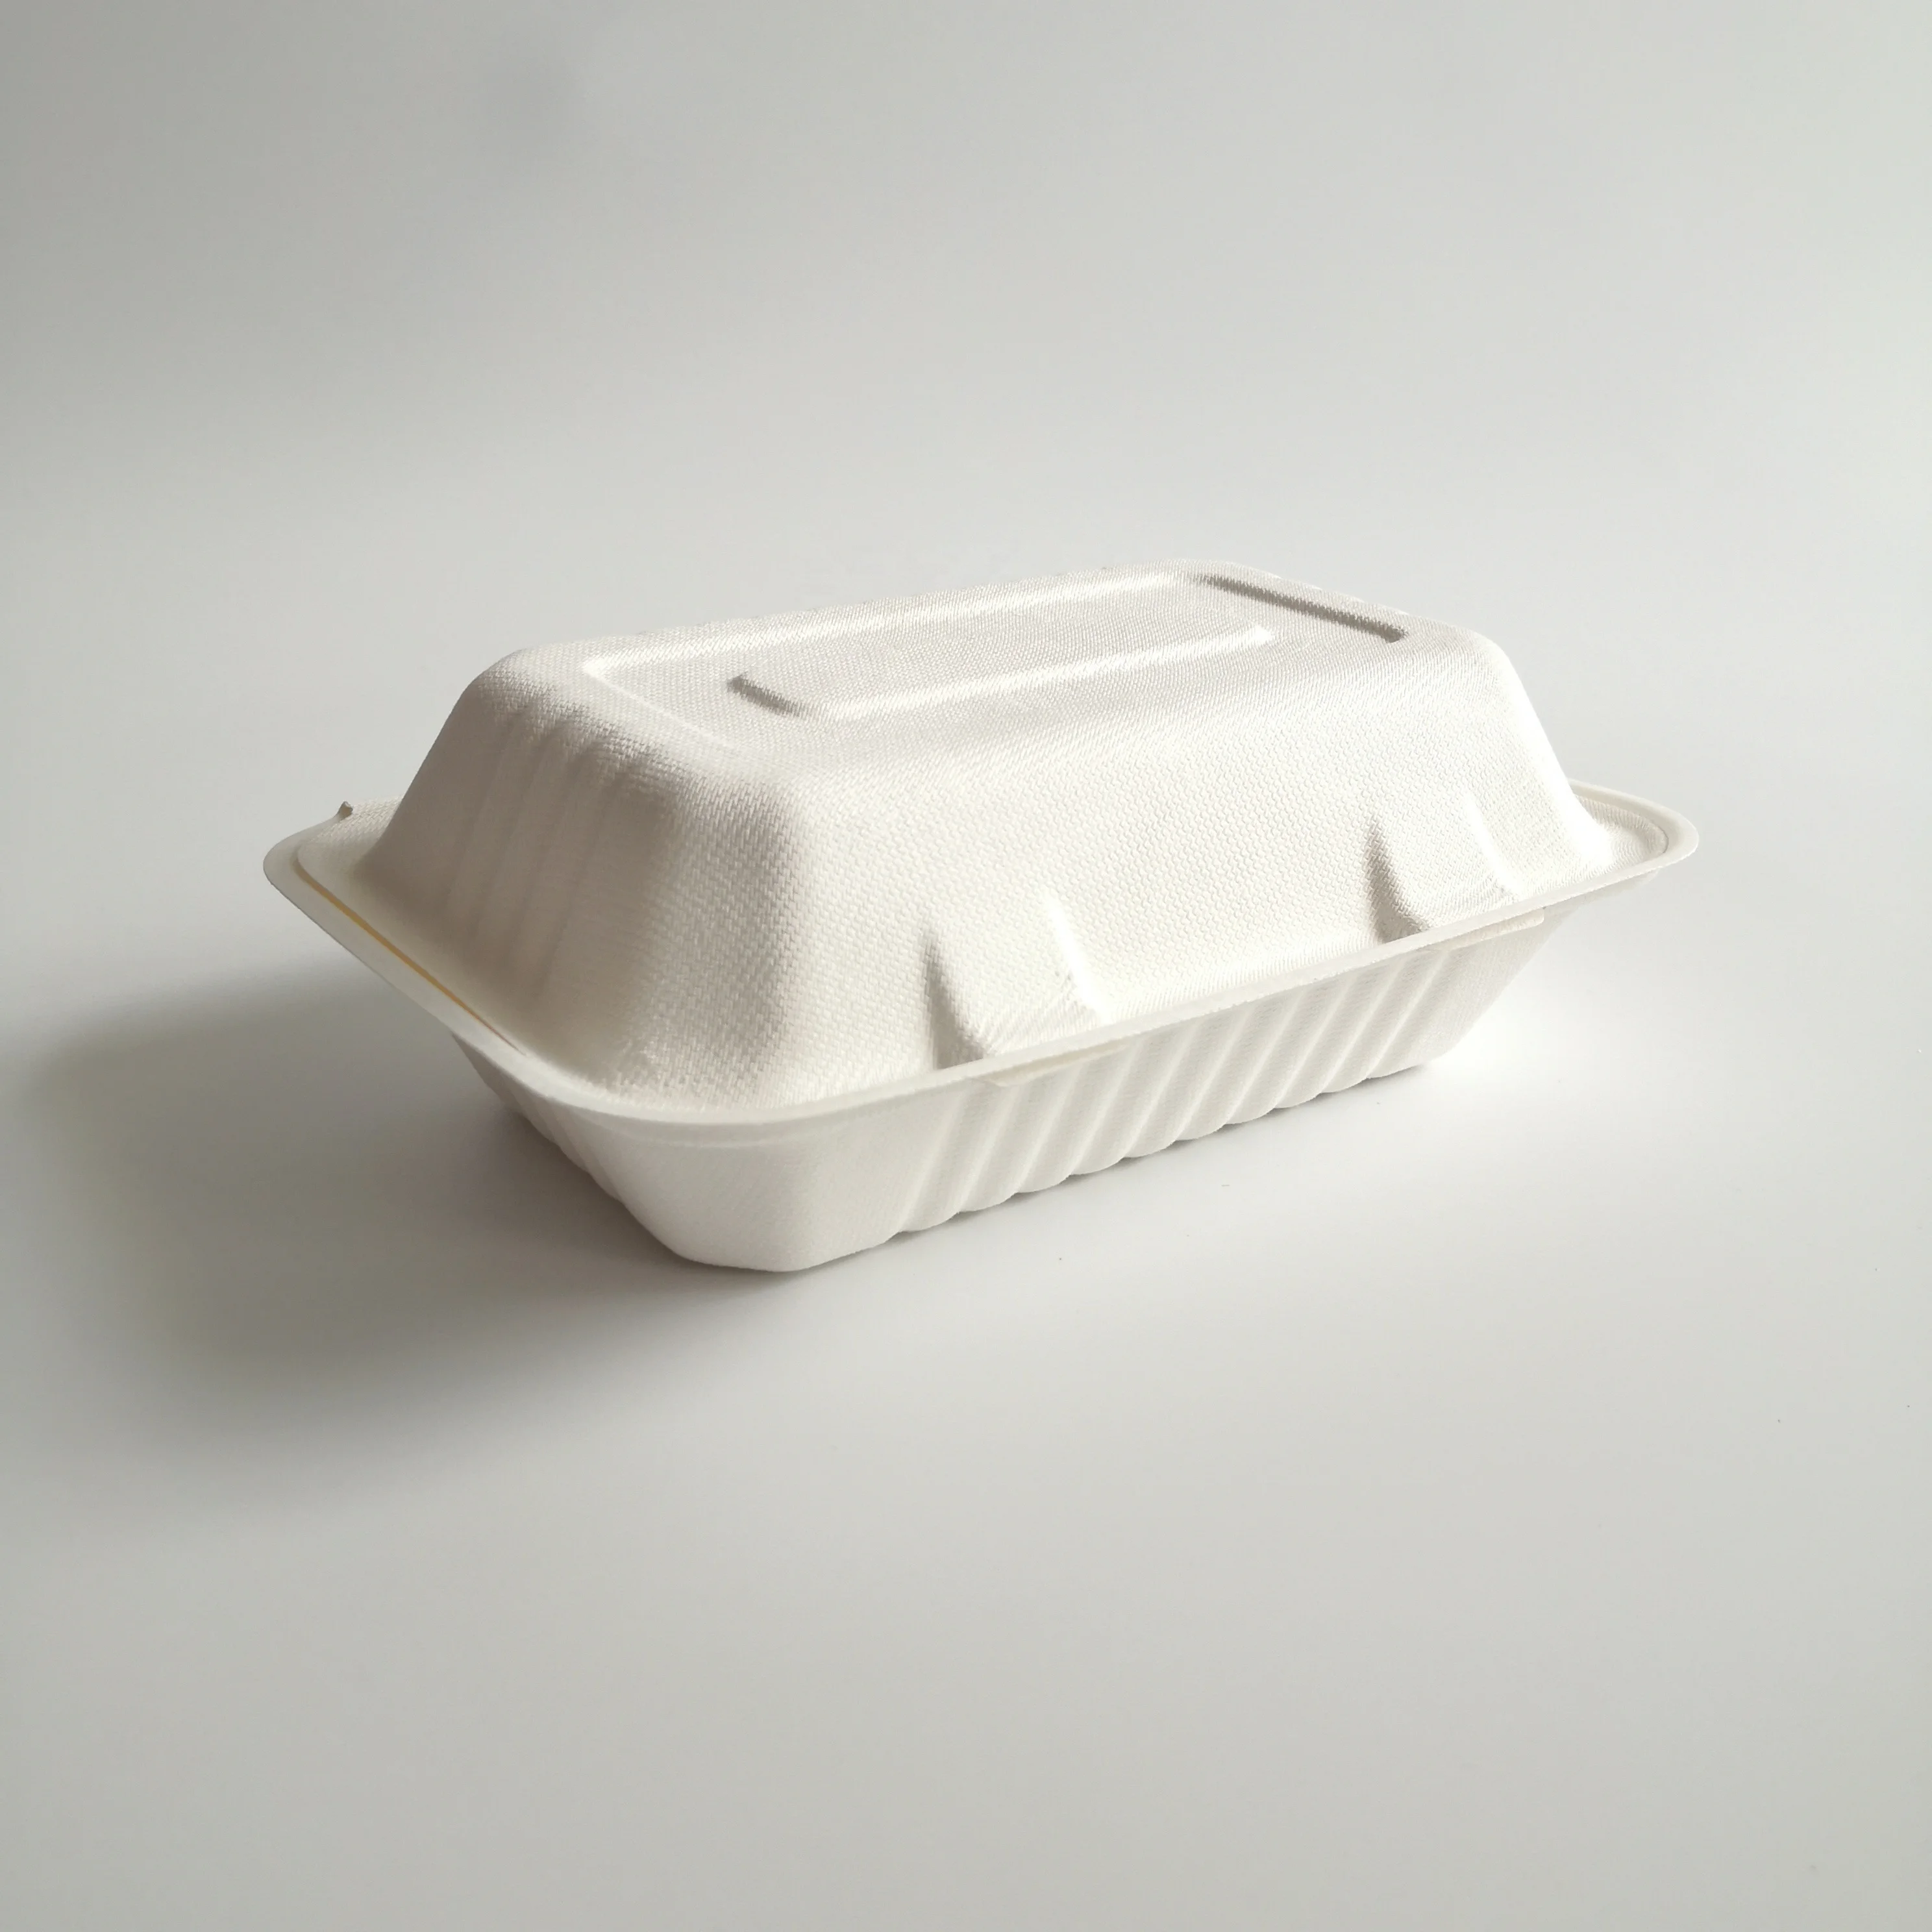 # 9" Bagasse Clamshell Meal box Biodegradable Sugarcane Food Containers BIO006